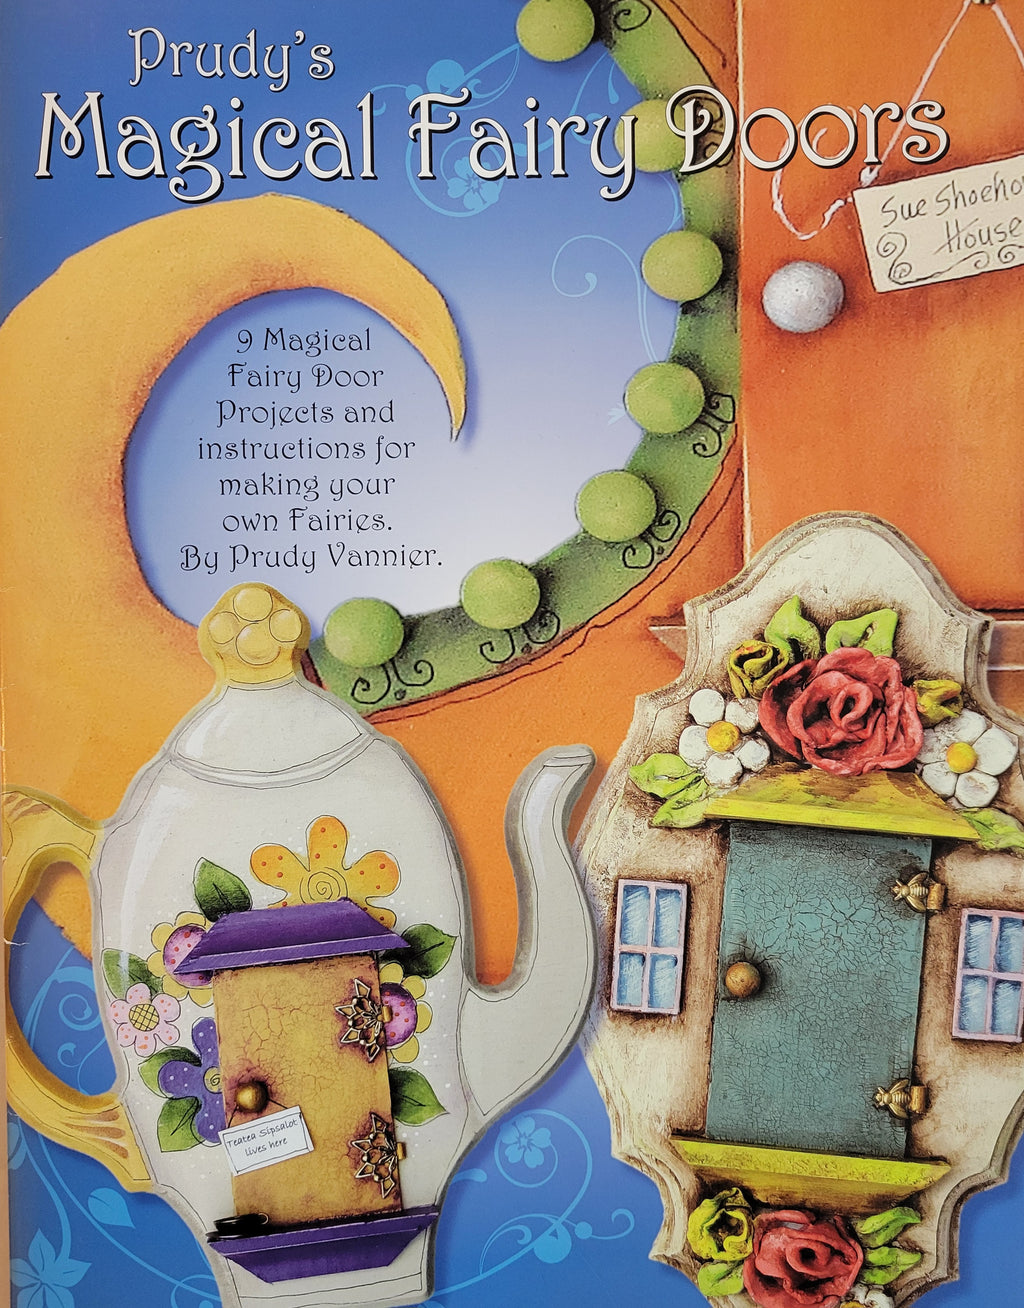 Magical Fairy Doors by Prudy Vannier